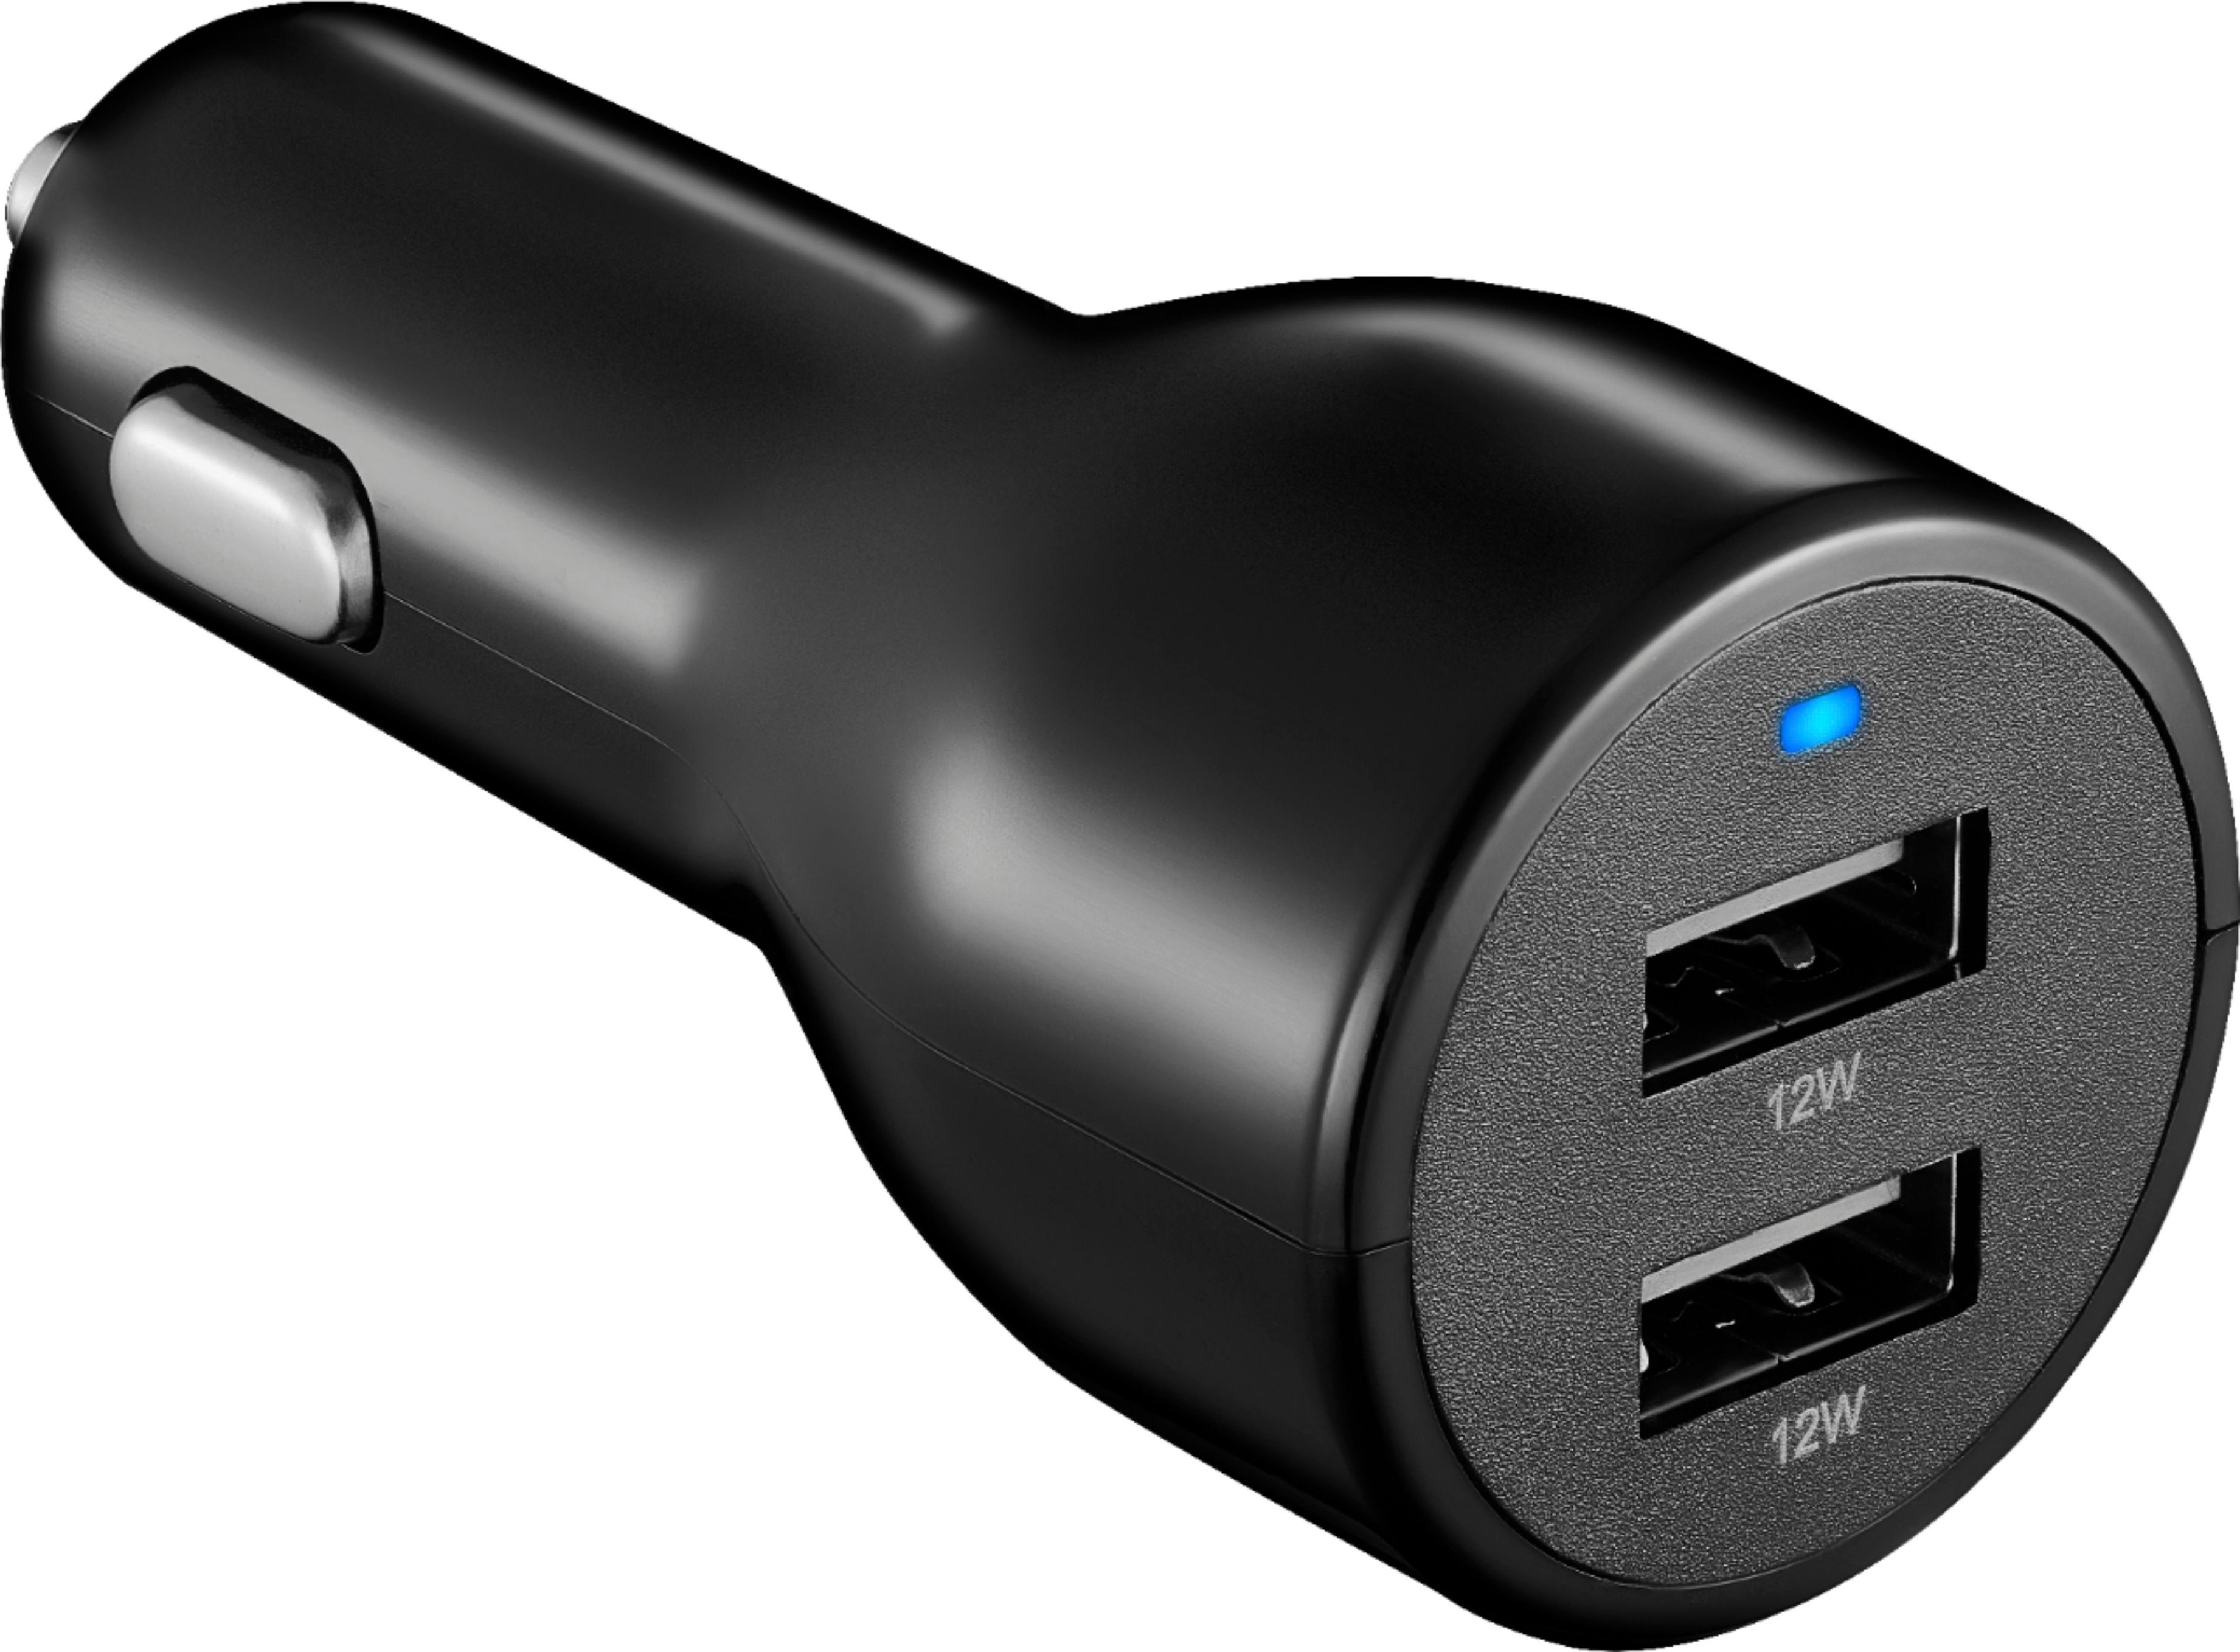 Insignia - 24W Dual USB Port Vehicle Charger - Black